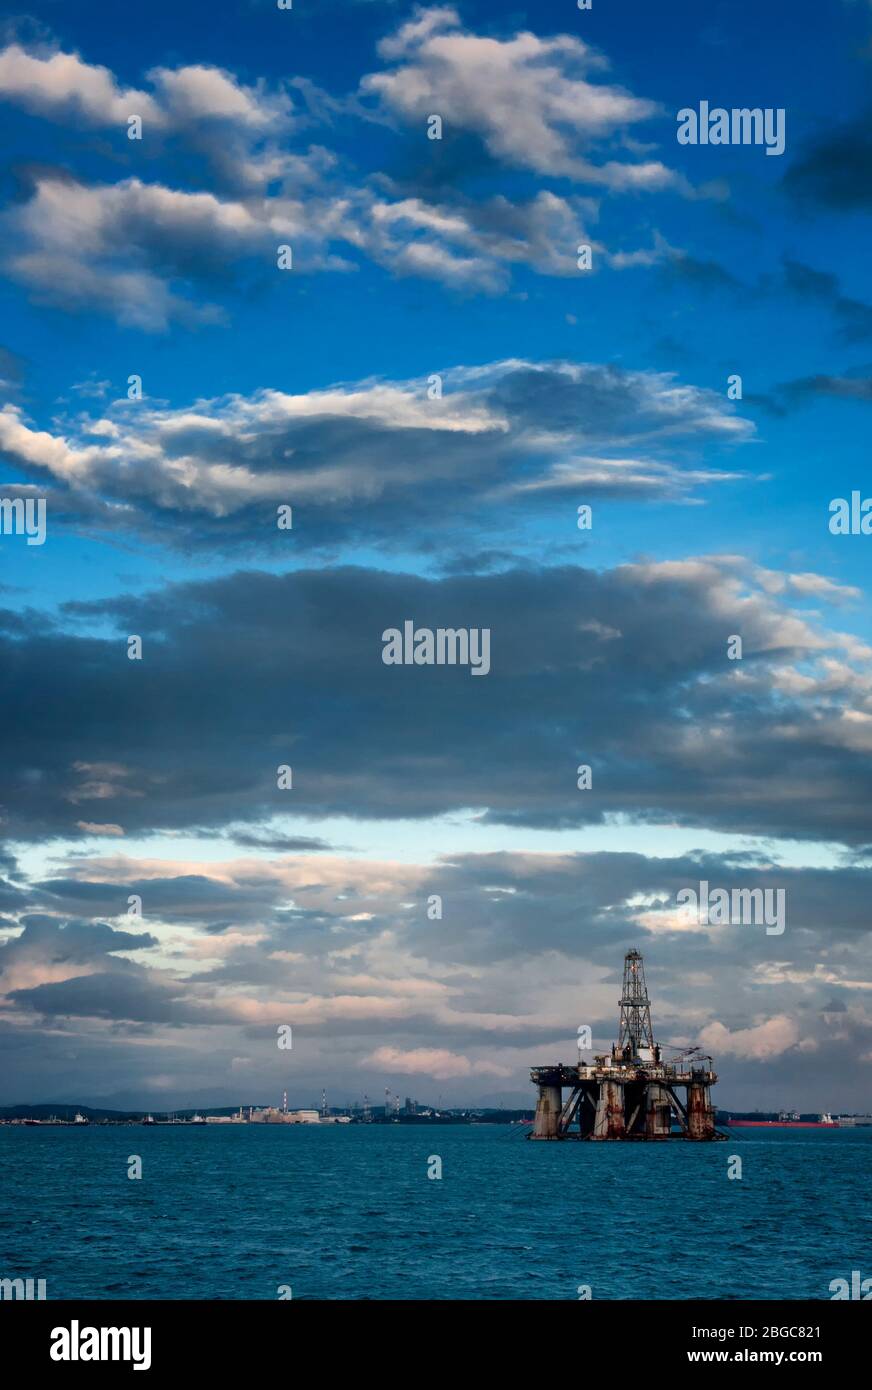 oil rig platform drilling at sea during sunset Stock Photo